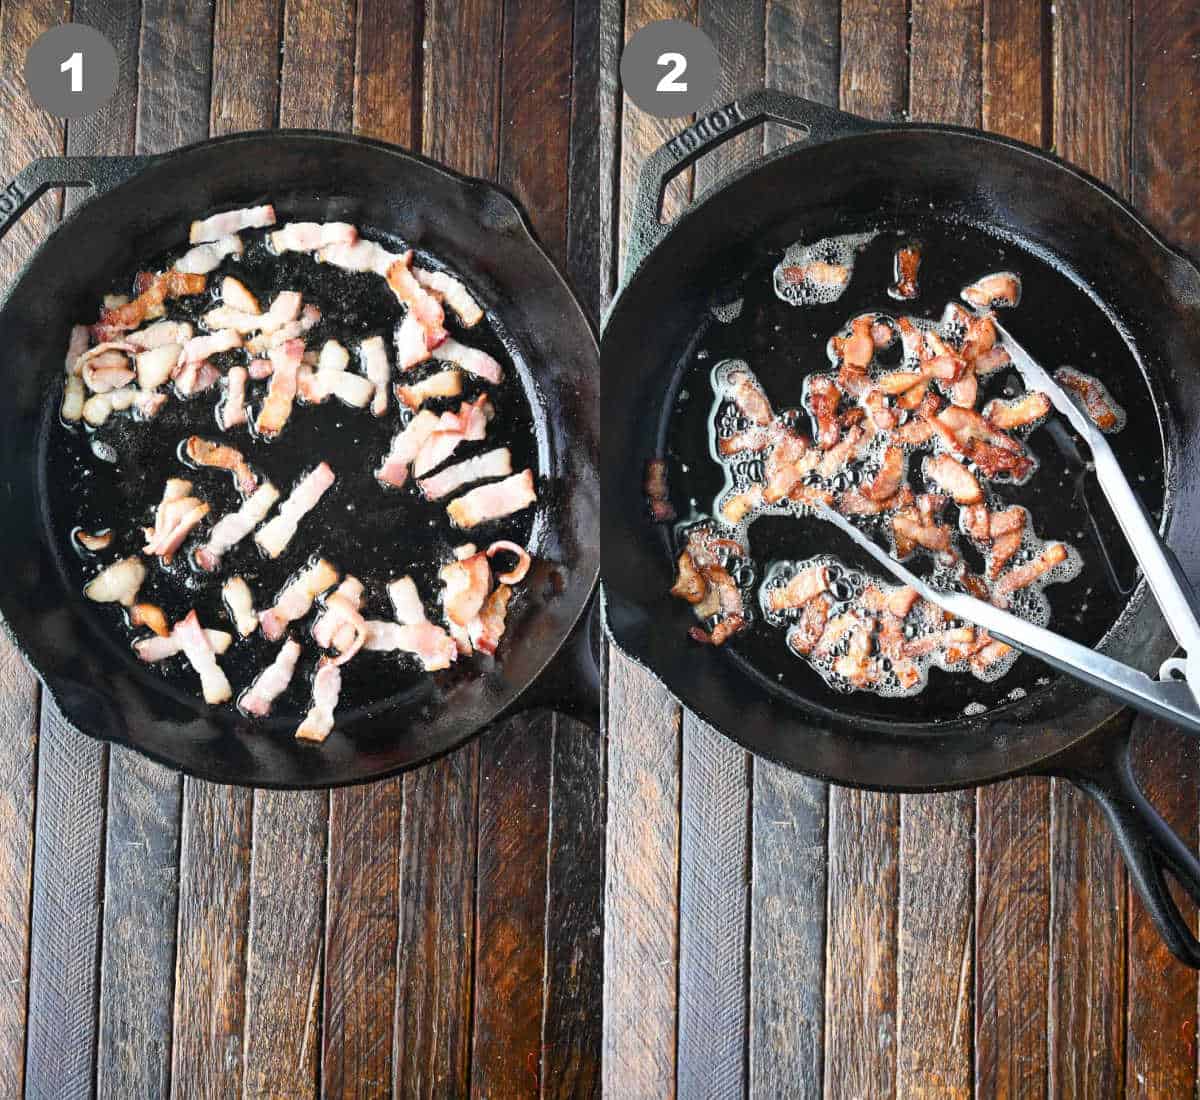 Diced bacon being fried in a cast iron skillet.